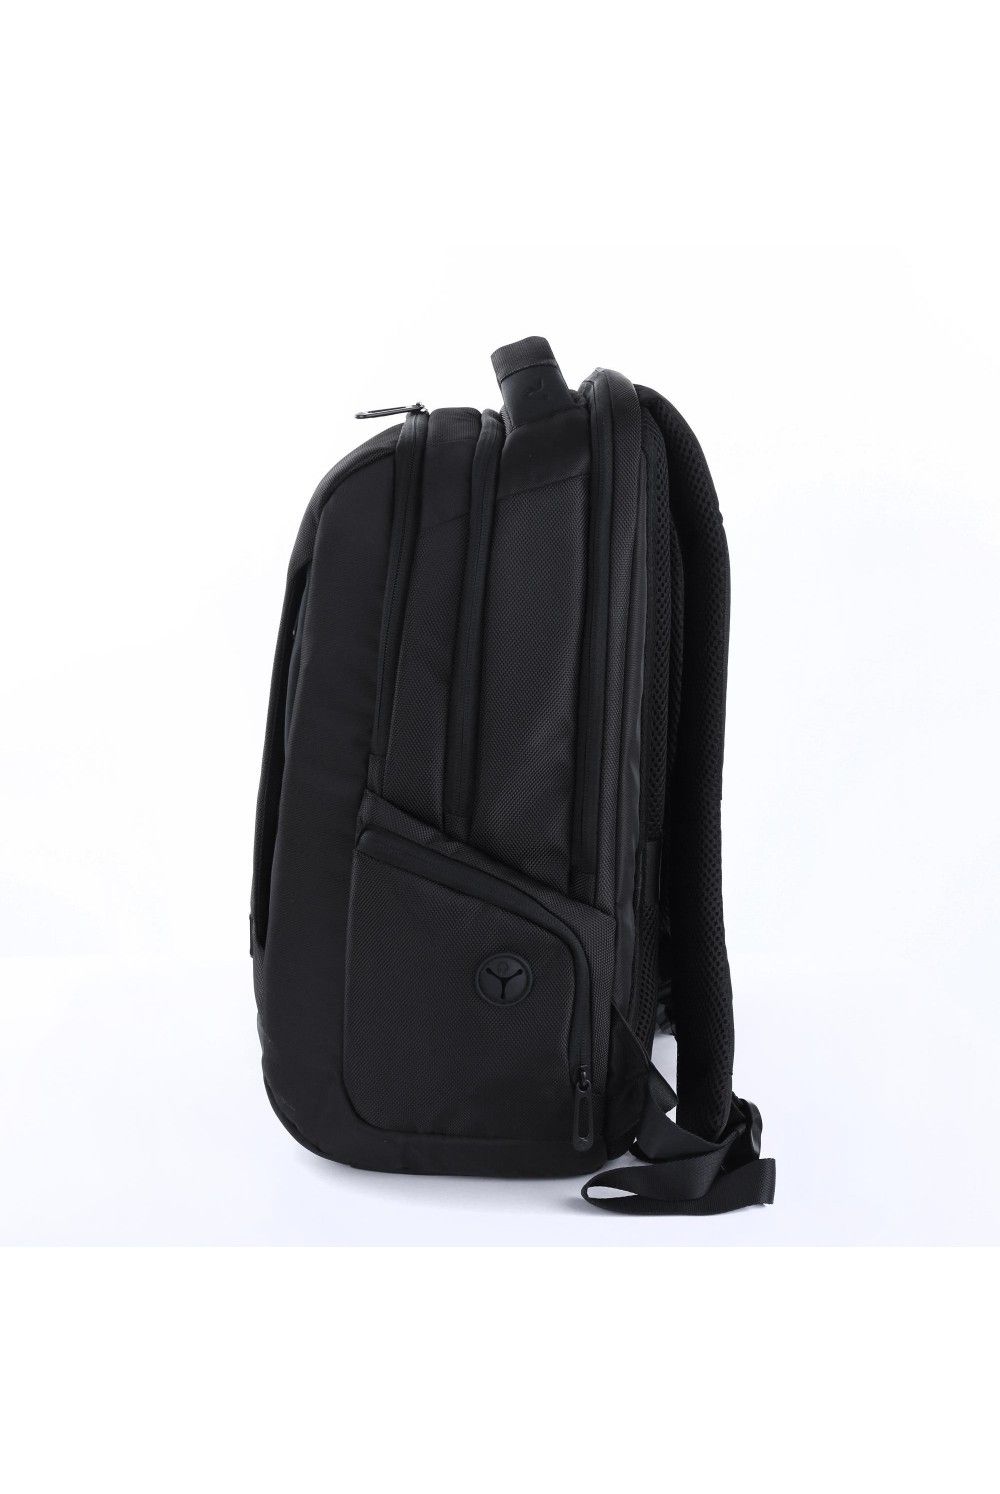 Roncato laptop backpack Desk 15.6 inches